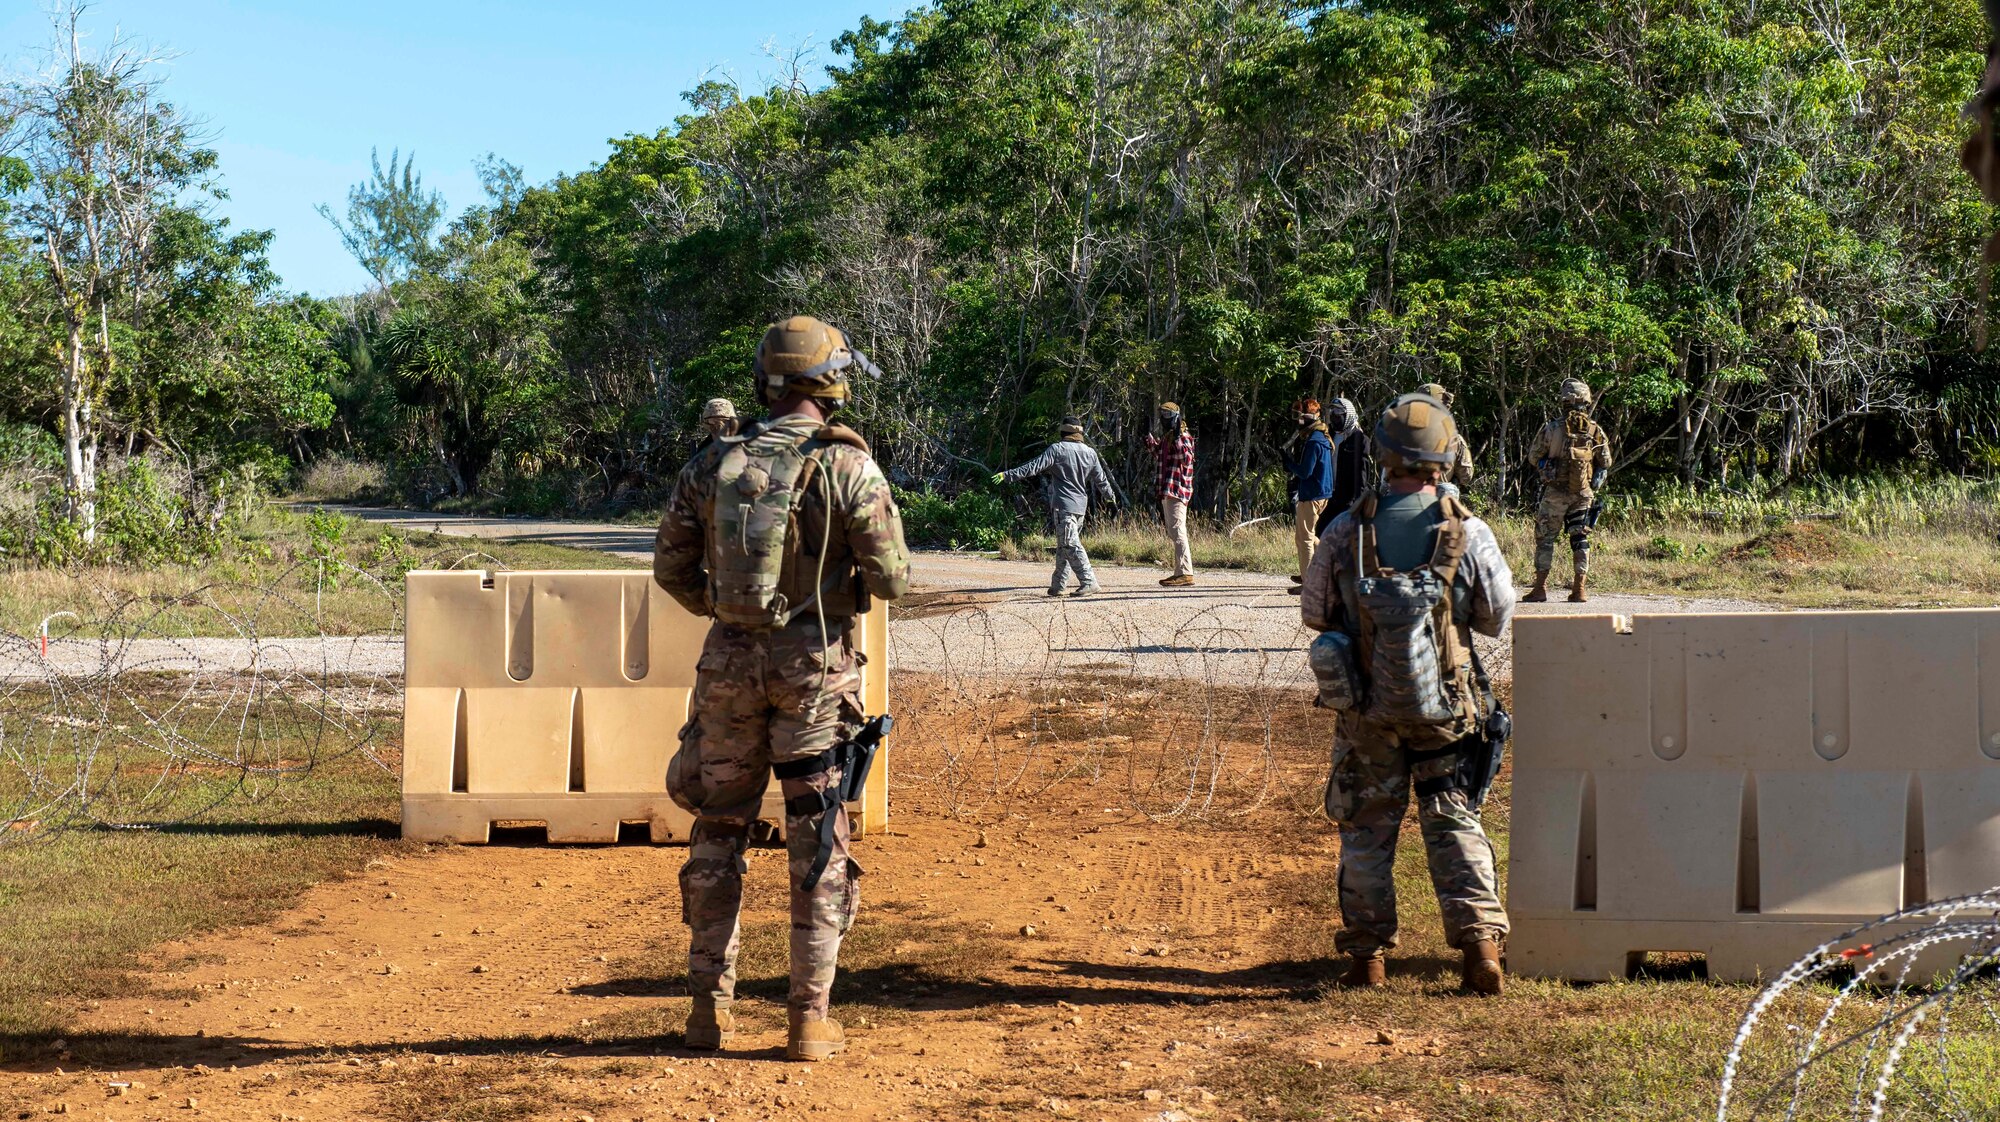 U.S. Air Force Airmen assigned to the 644th Combat Communications Squadron, stand guard at an entry control point during a field training exercise on North West Field, Guam, April 22, 2021. Students were tested on the skills and knowledge they gained over the past several weeks during exercise Dragon Forge. Exercise DF is a combat skills training course that prepares participants to deploy to austere locations. (U.S. Air Force photo by Senior Airman Helena Owens)